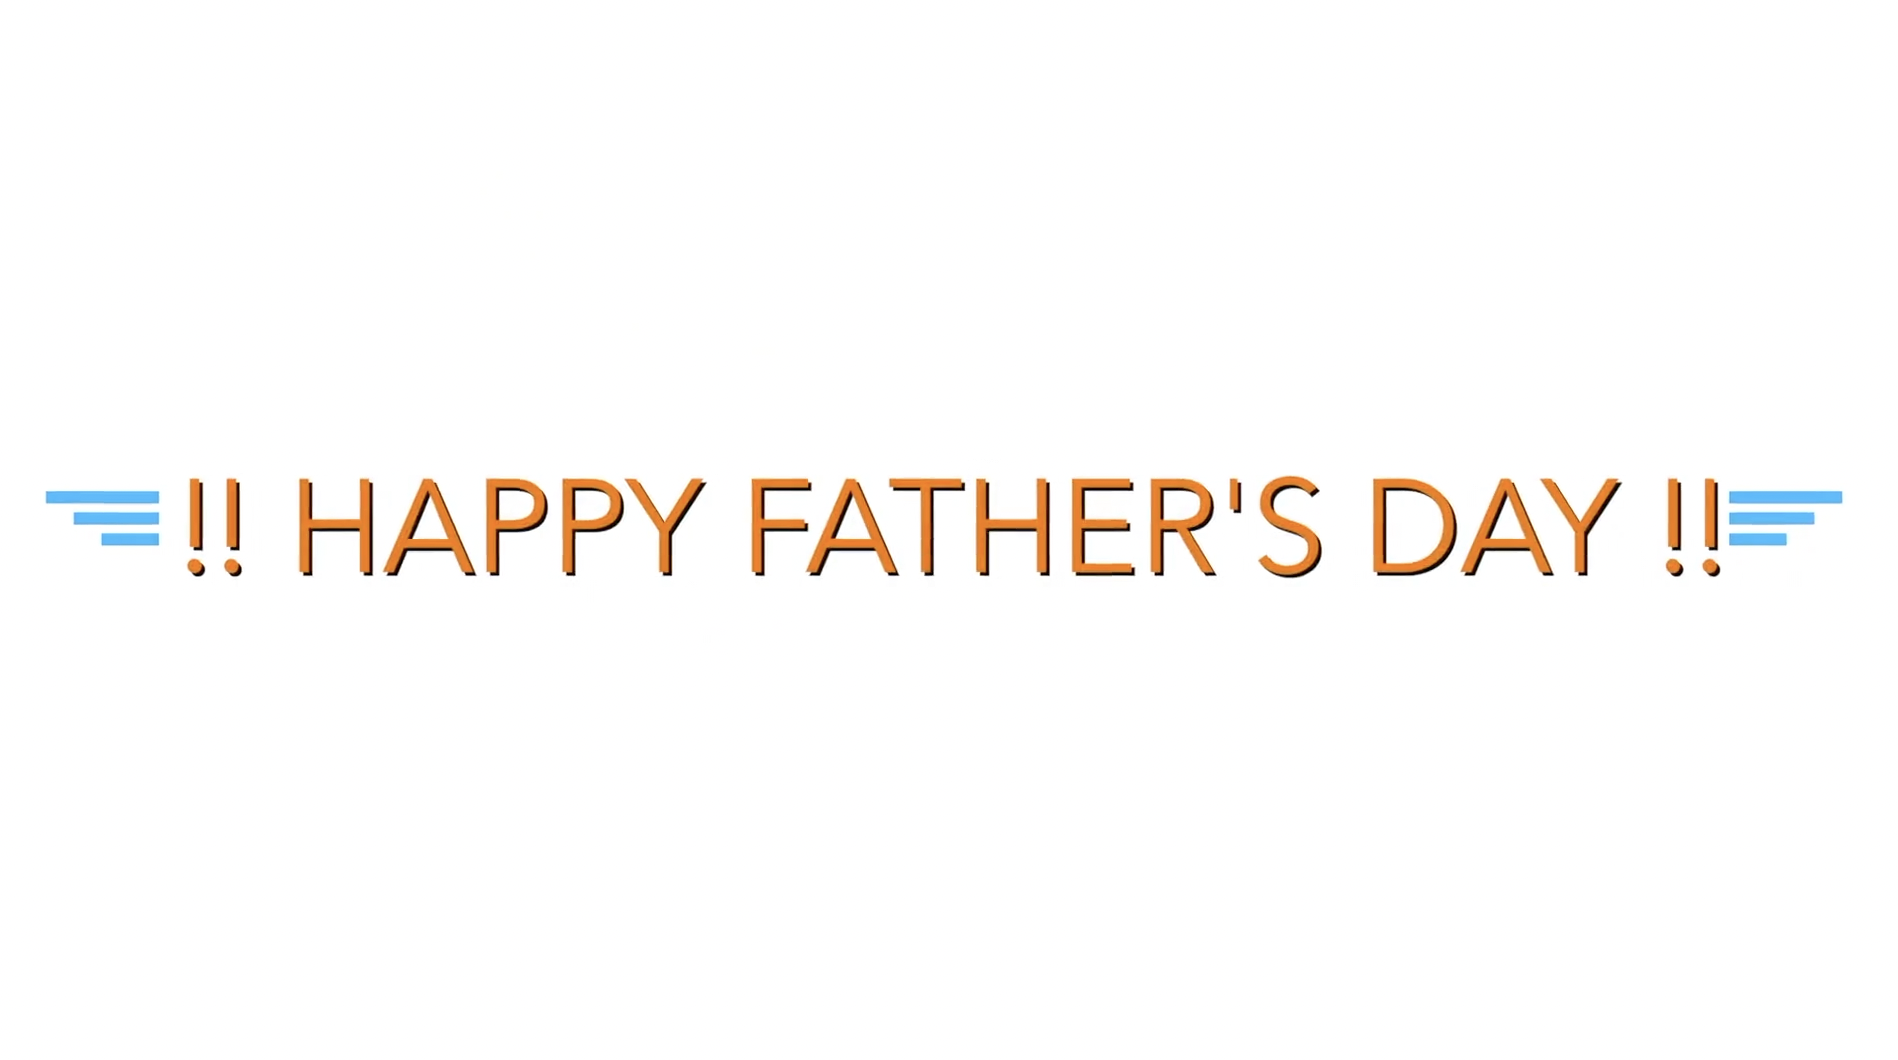 Happy Father's Day to all our Amazing Dads!